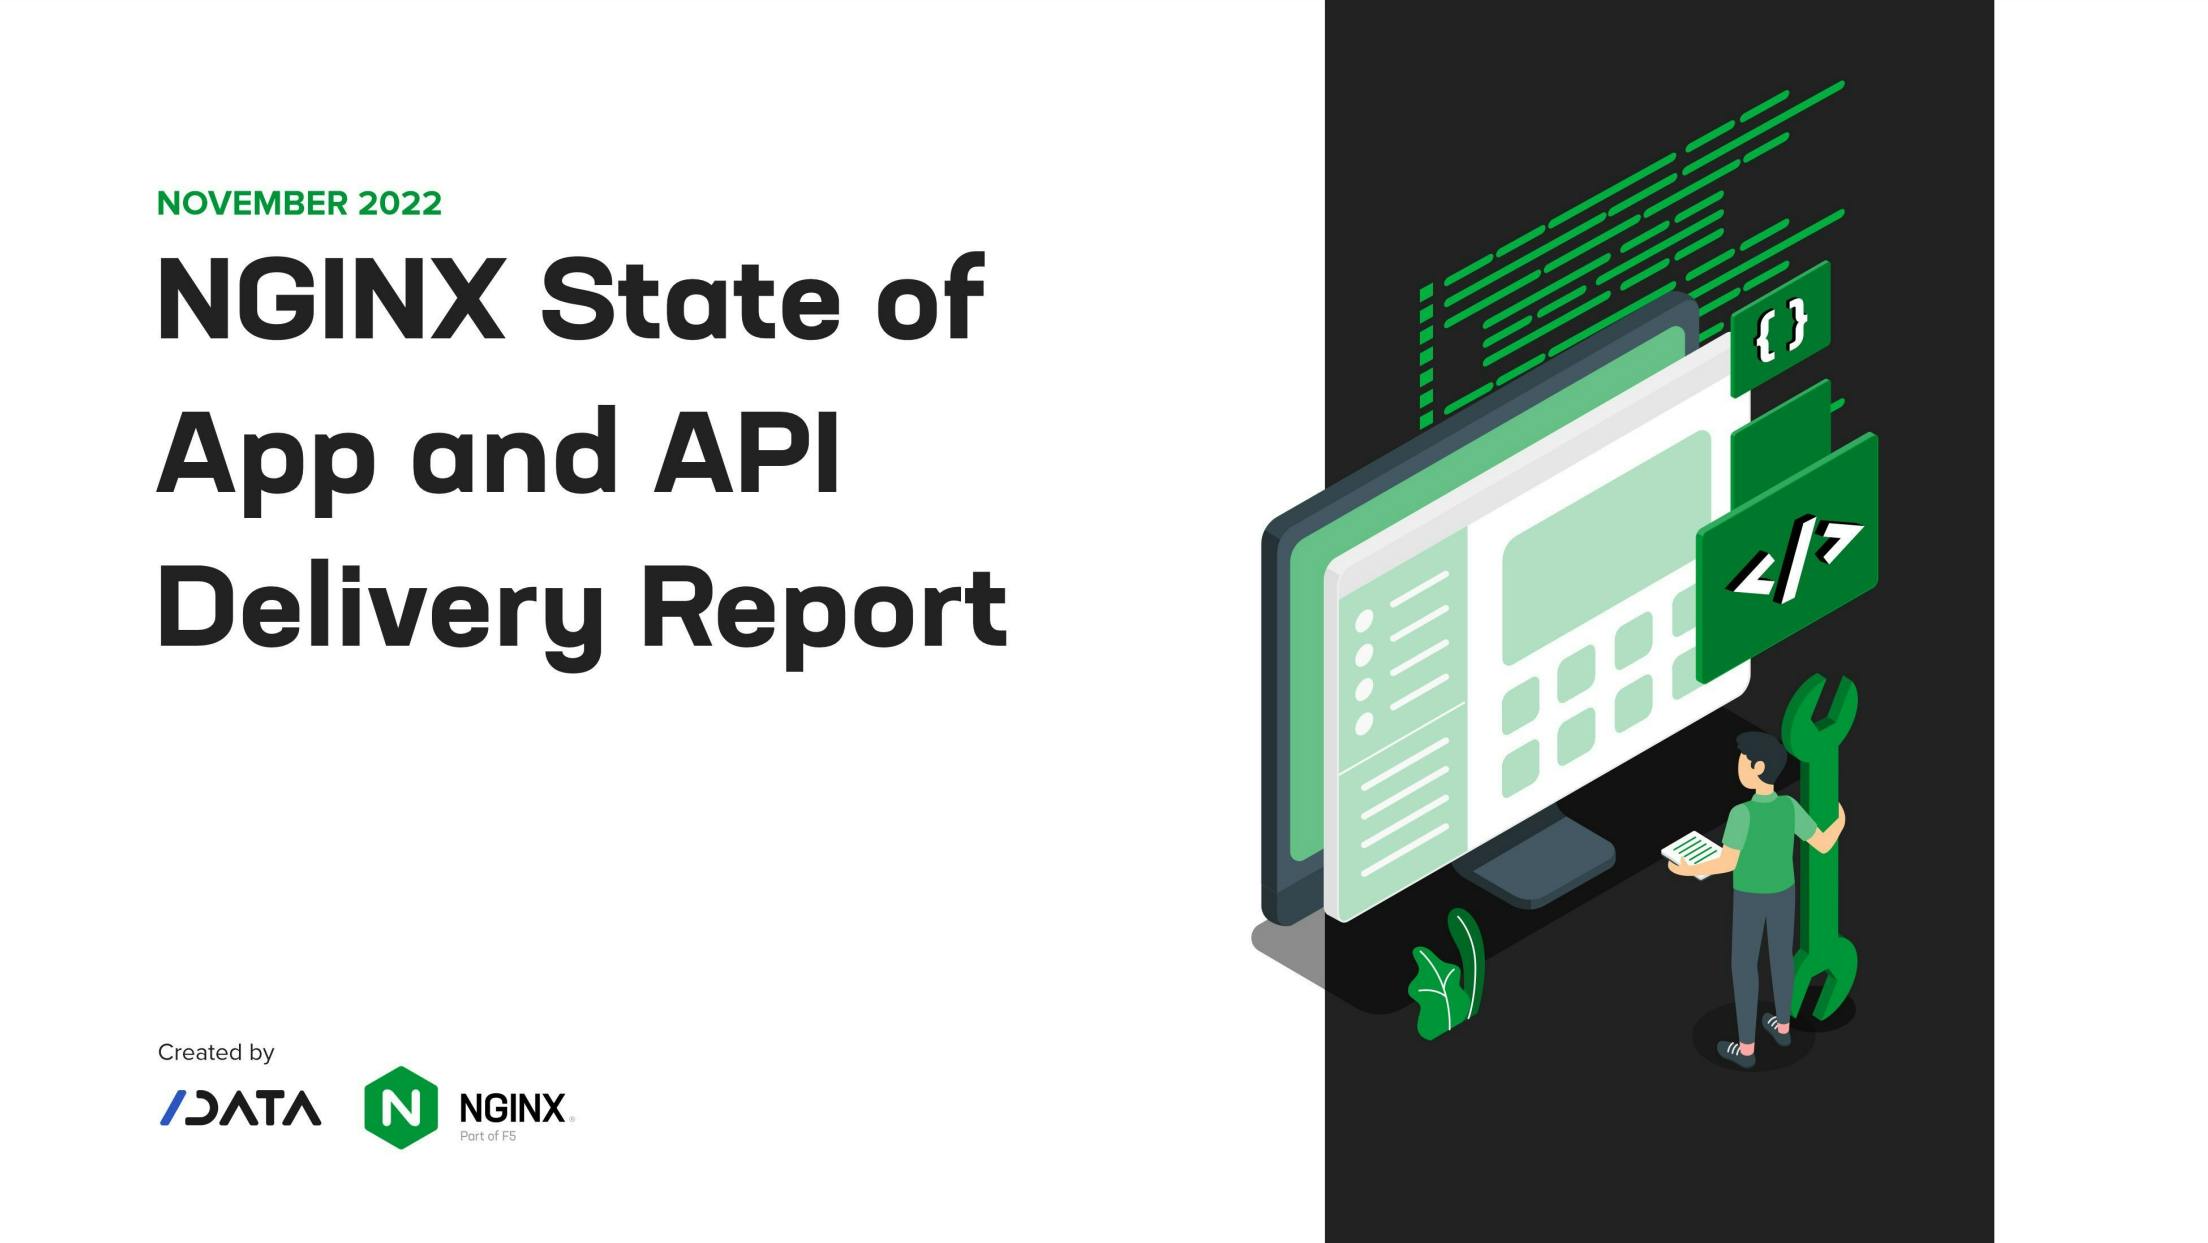 NGINX State of App and API Delivery Report